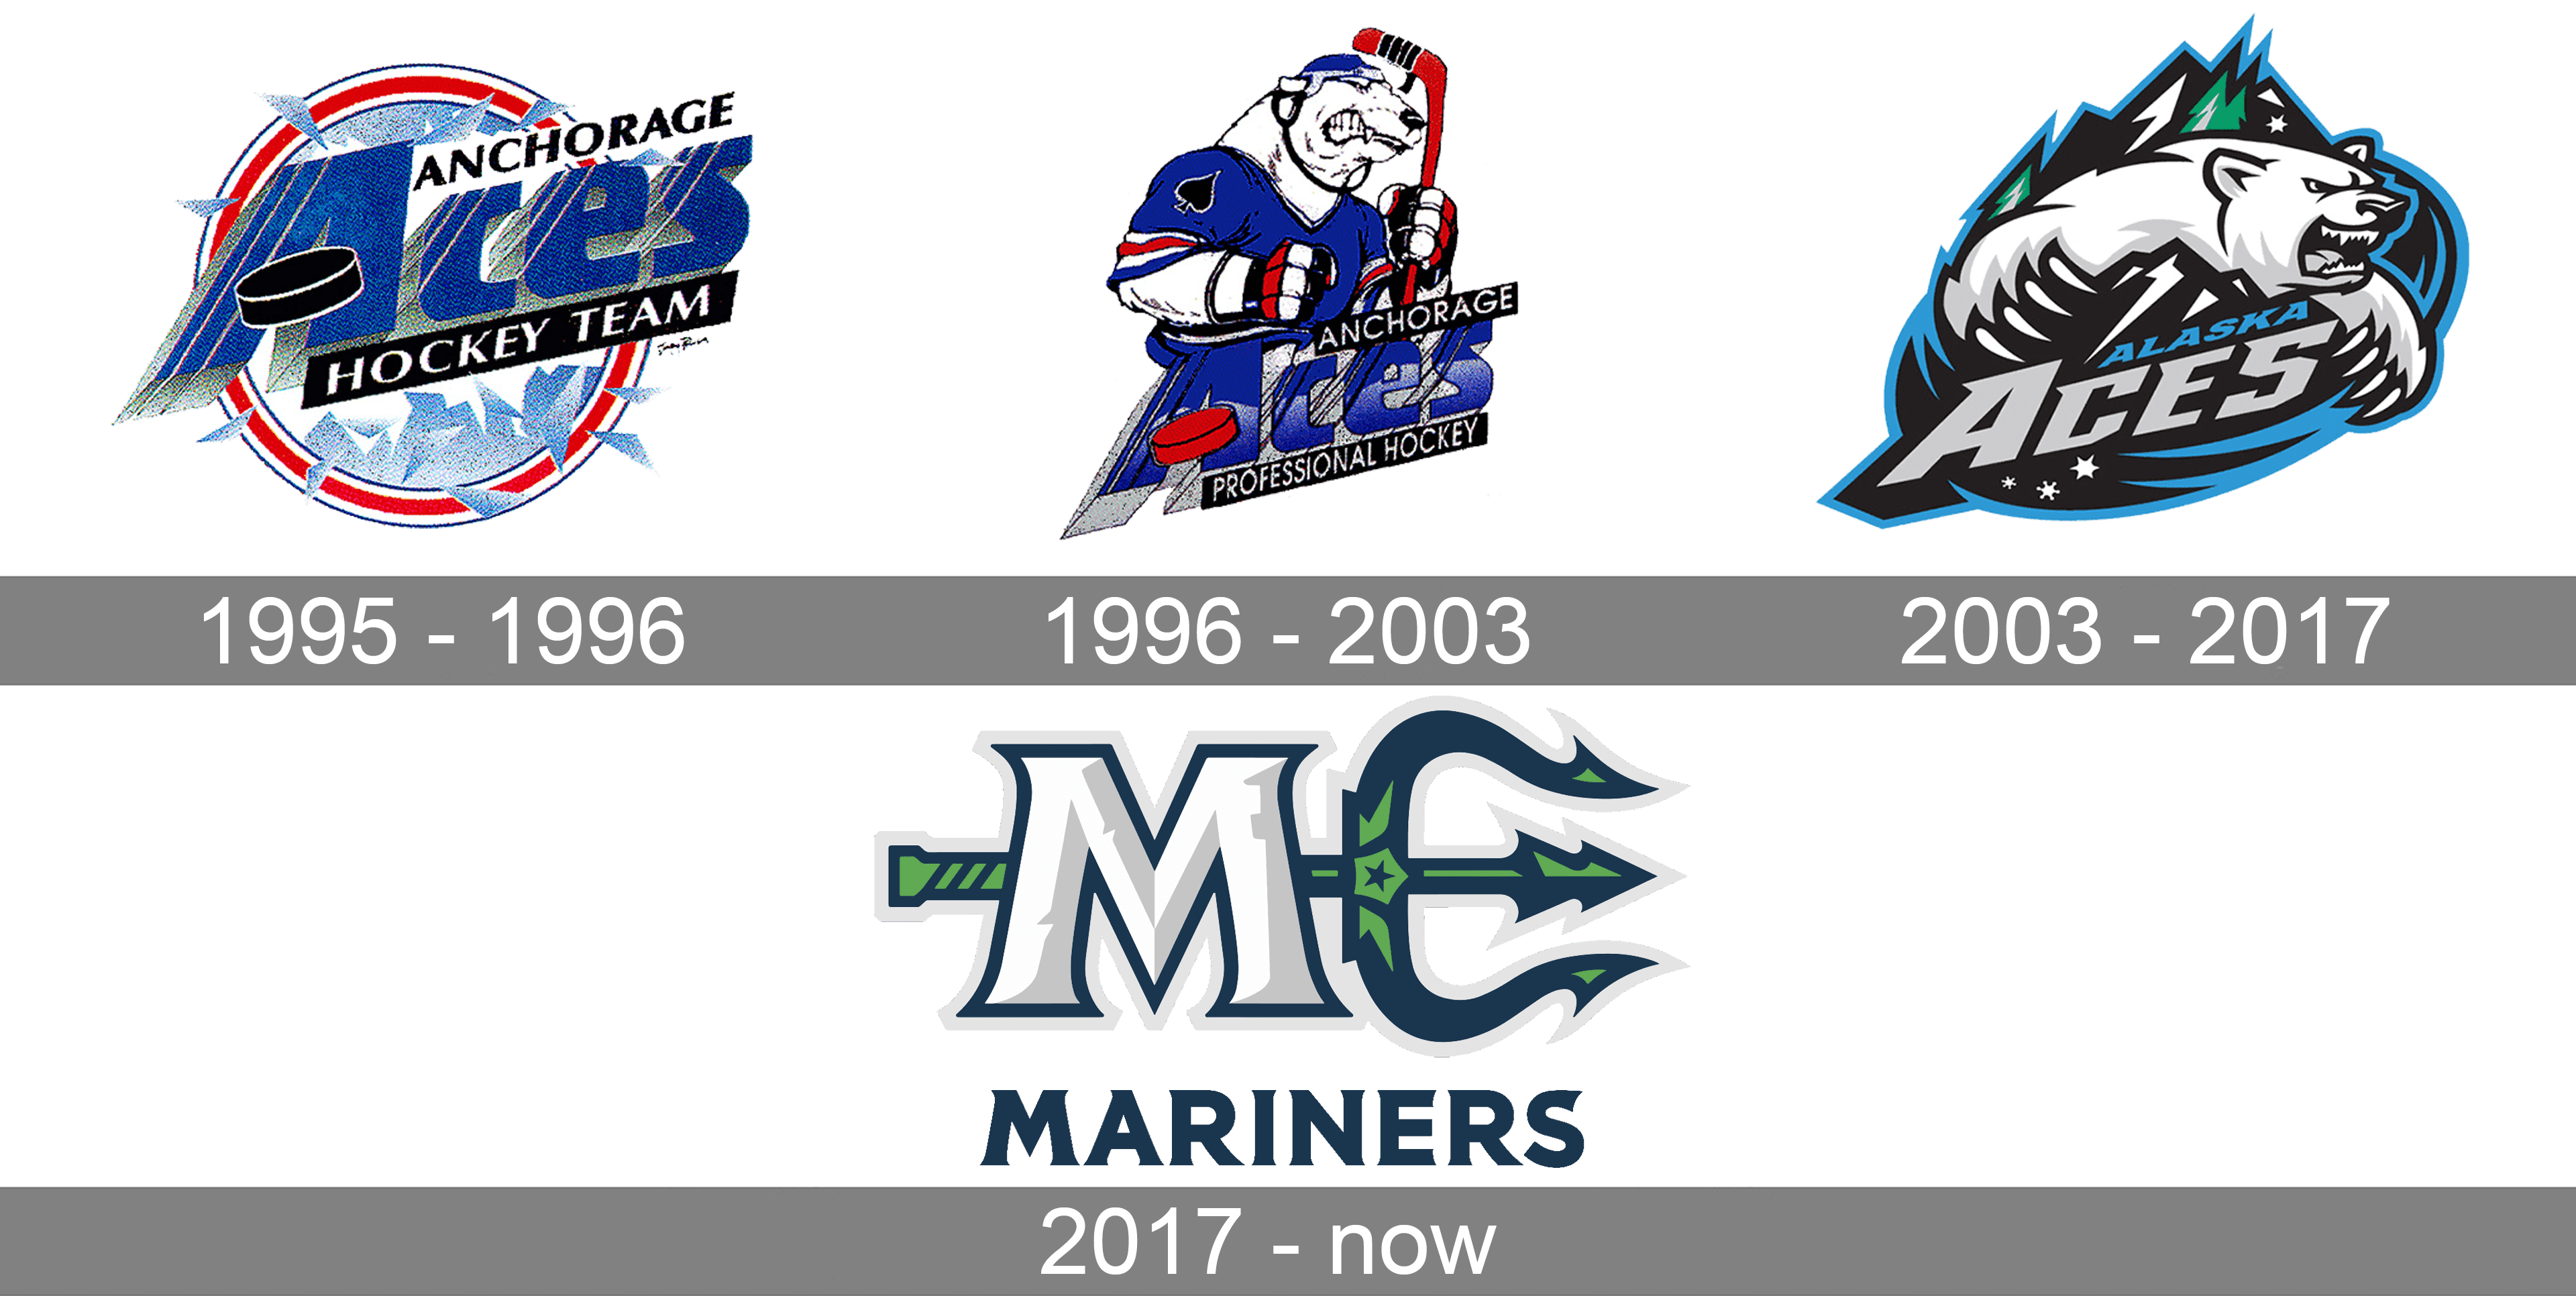 Quad City Mallards Logo and symbol, meaning, history, PNG, brand